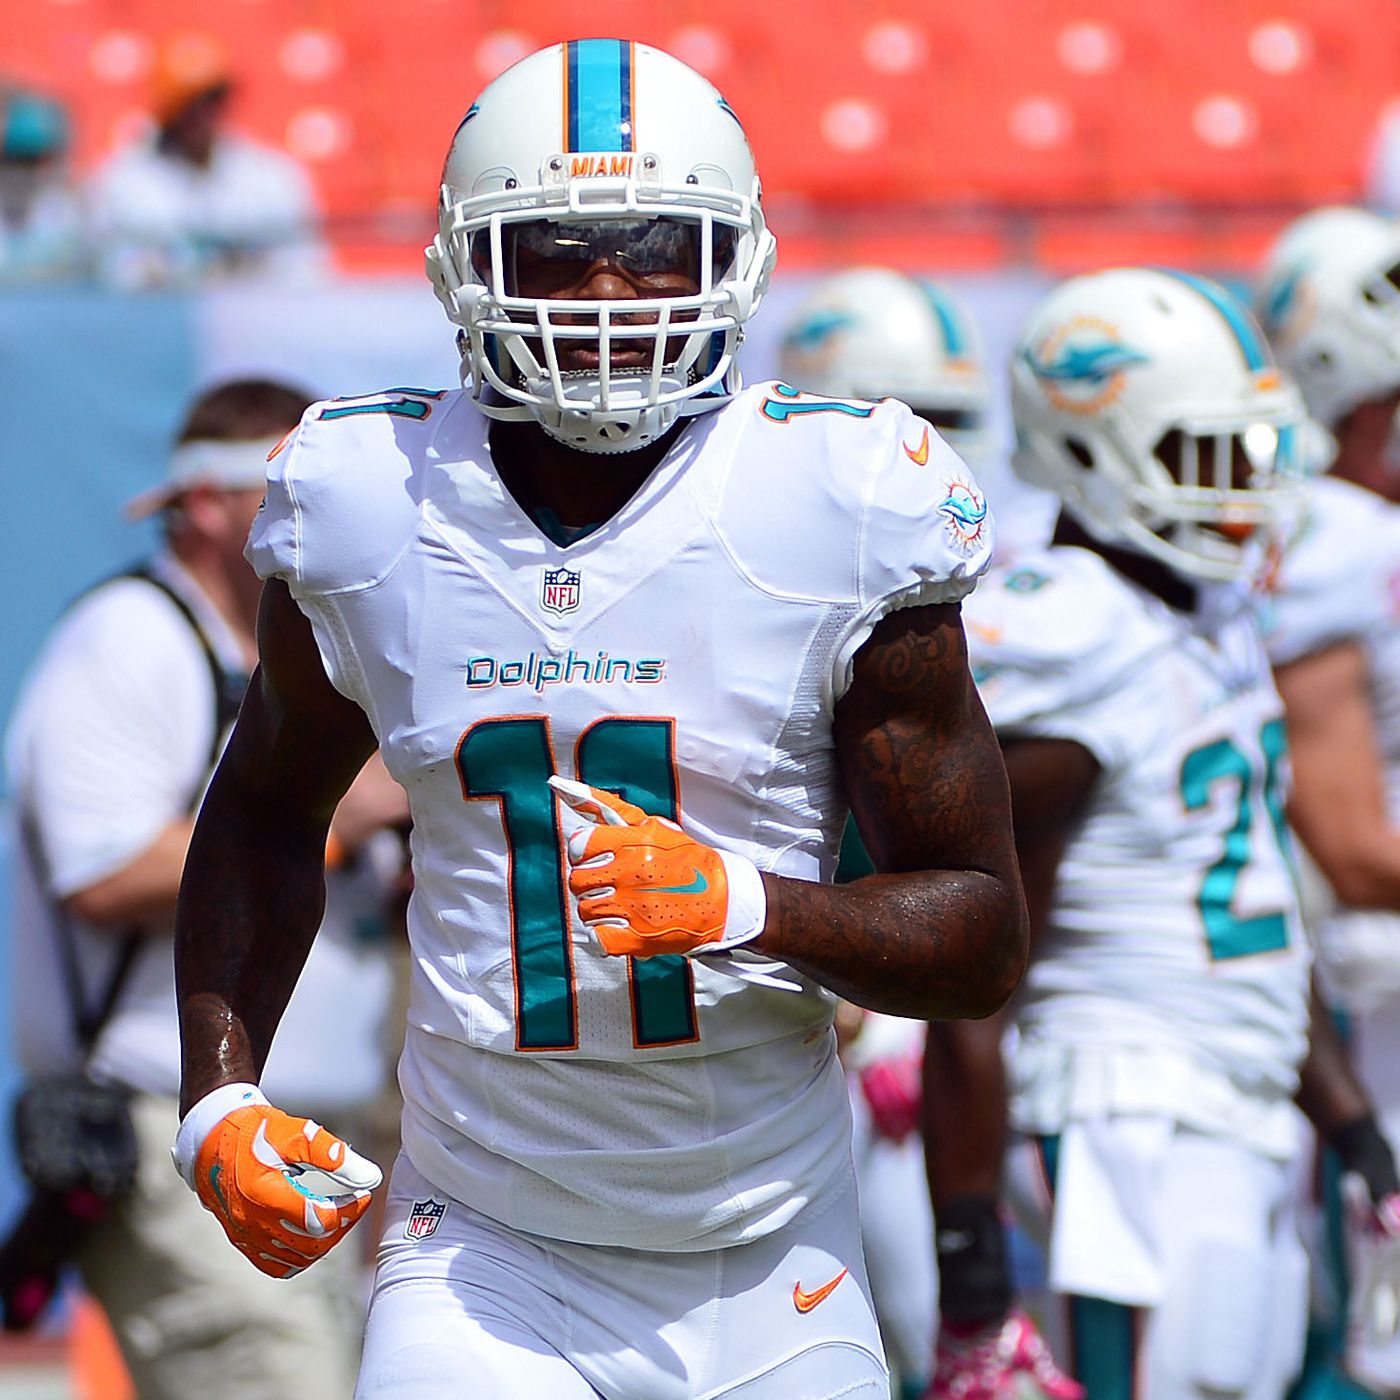 wallace miami dolphins